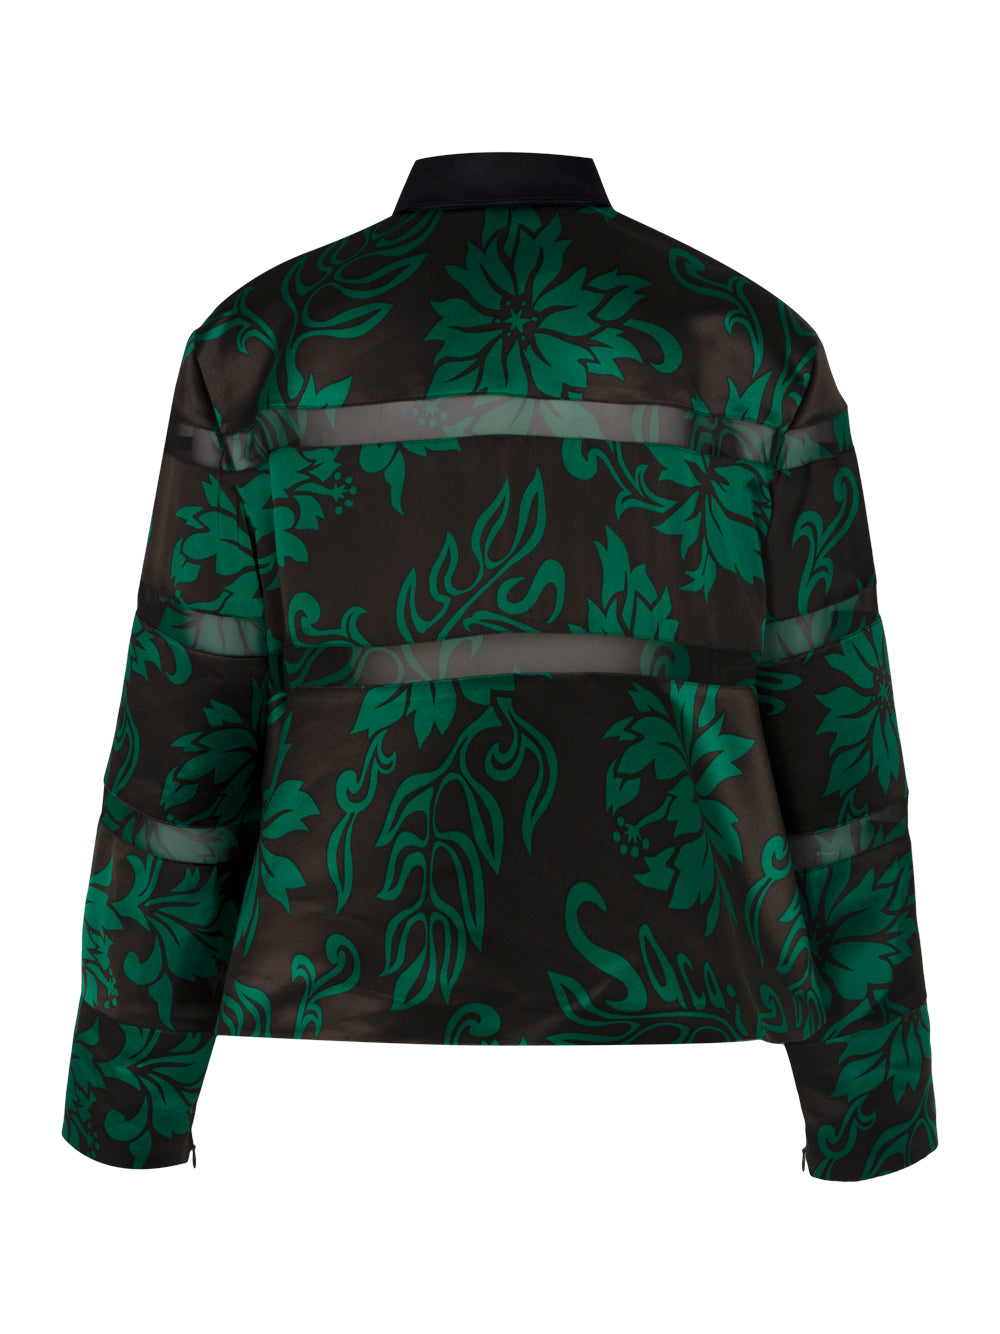 Floral Print Rugby Shirt (Green)